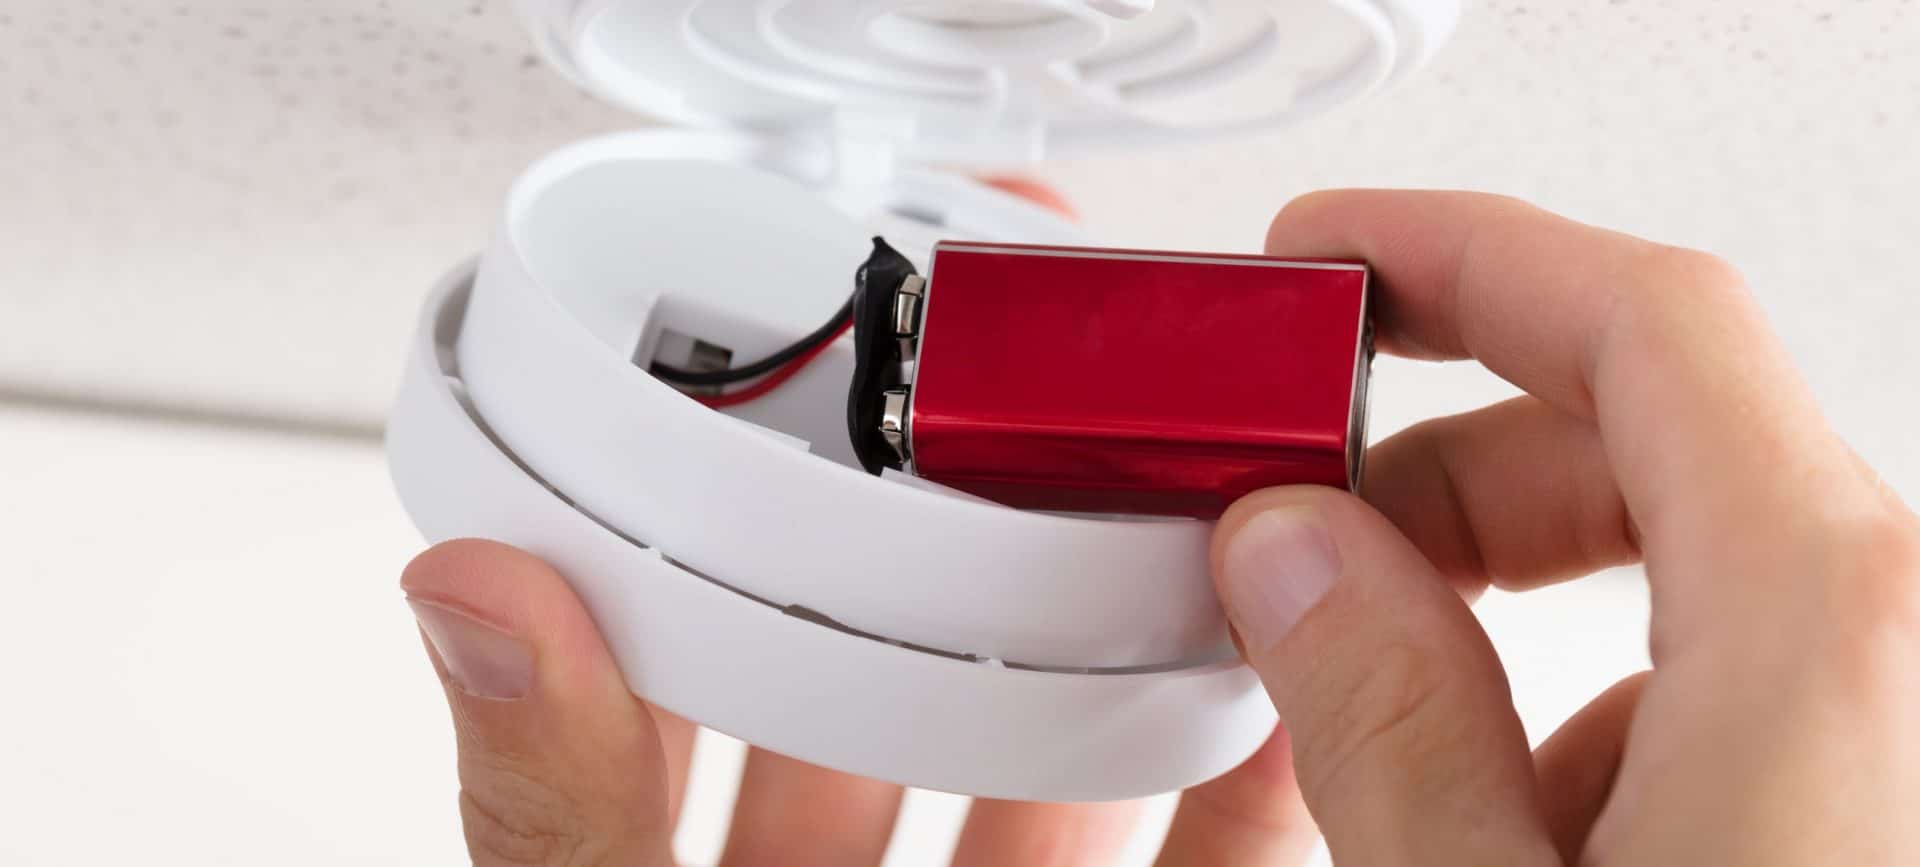 Close-up Of A Person's Hand Inserting Battery In Smoke Detector